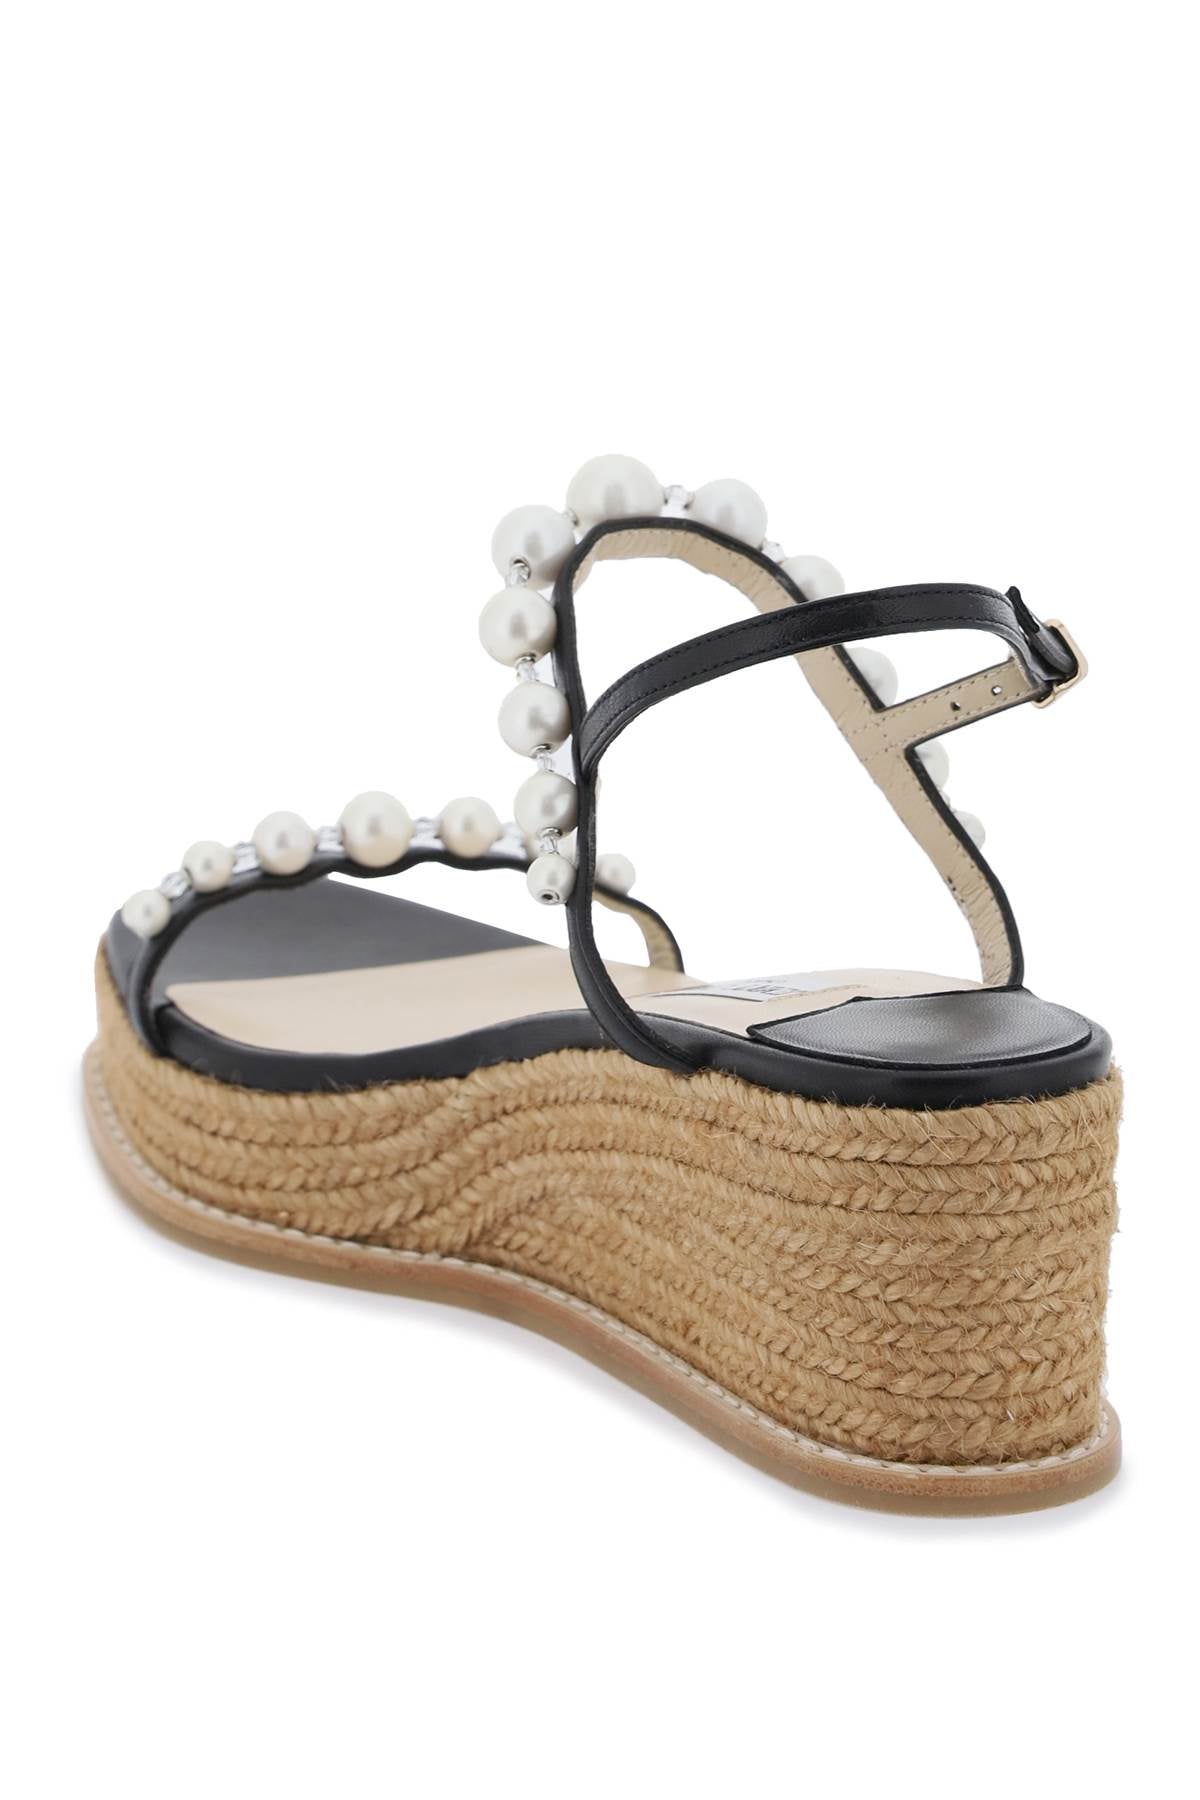 JIMMY CHOO Multicolor Woven Wedge Sandals Embellished with Pearls and Crystals